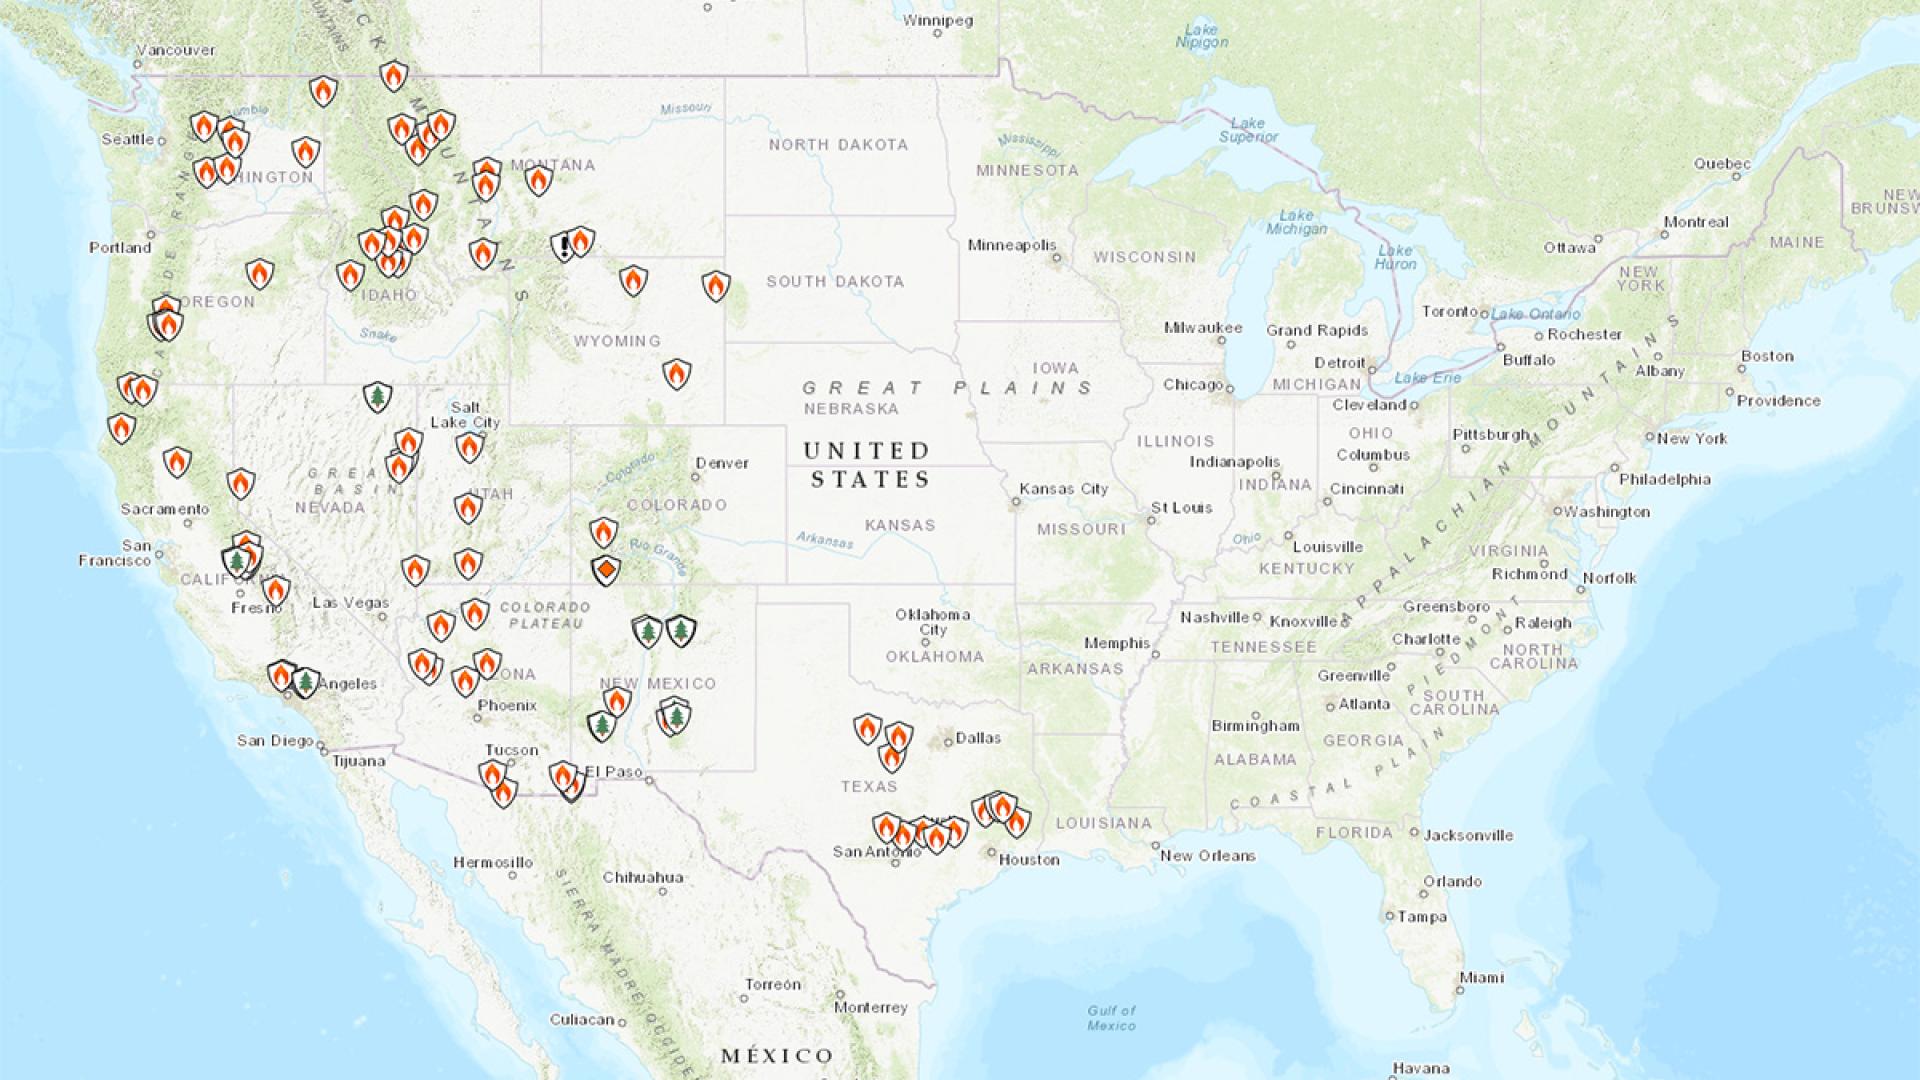 An interactive map of the U.S. with icons showing the location of each wildfire, with many fires located in the West.